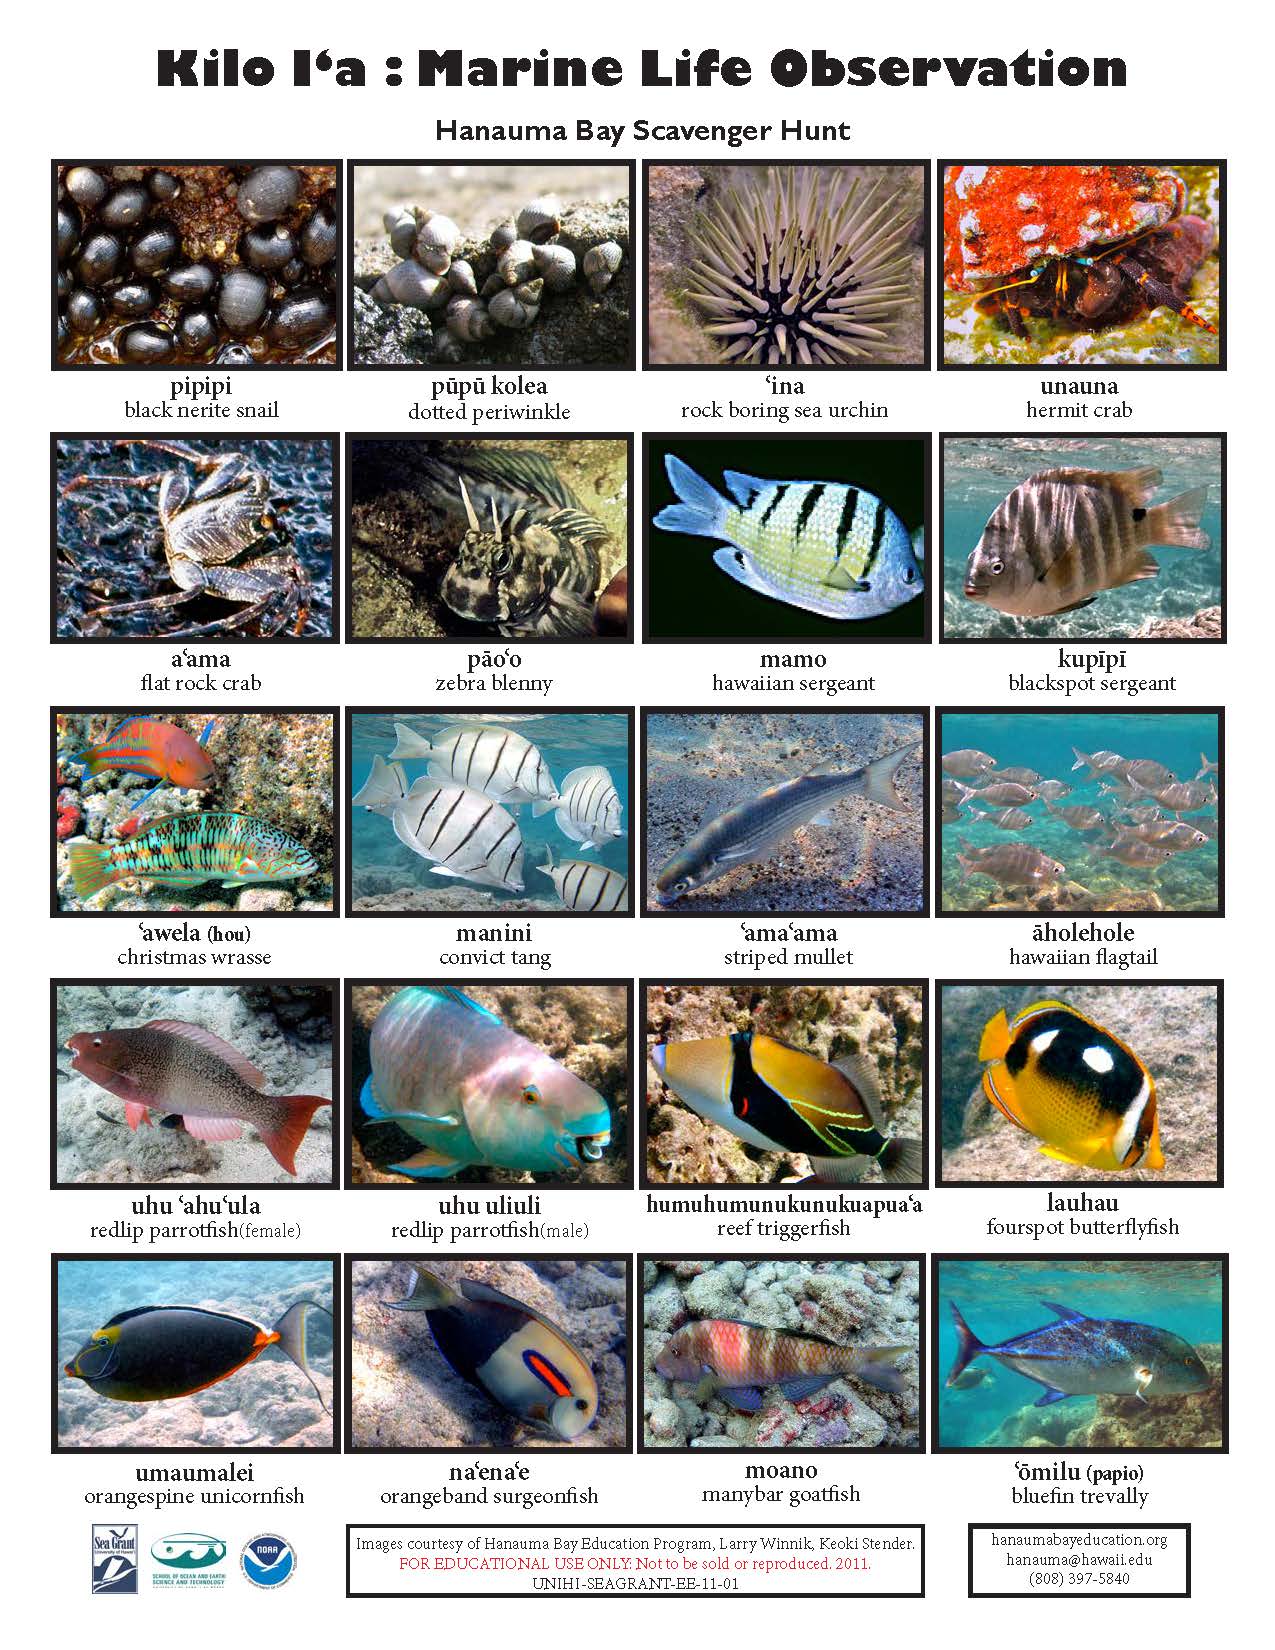 20 species of fish and crabs named and depicted in a bingo style card